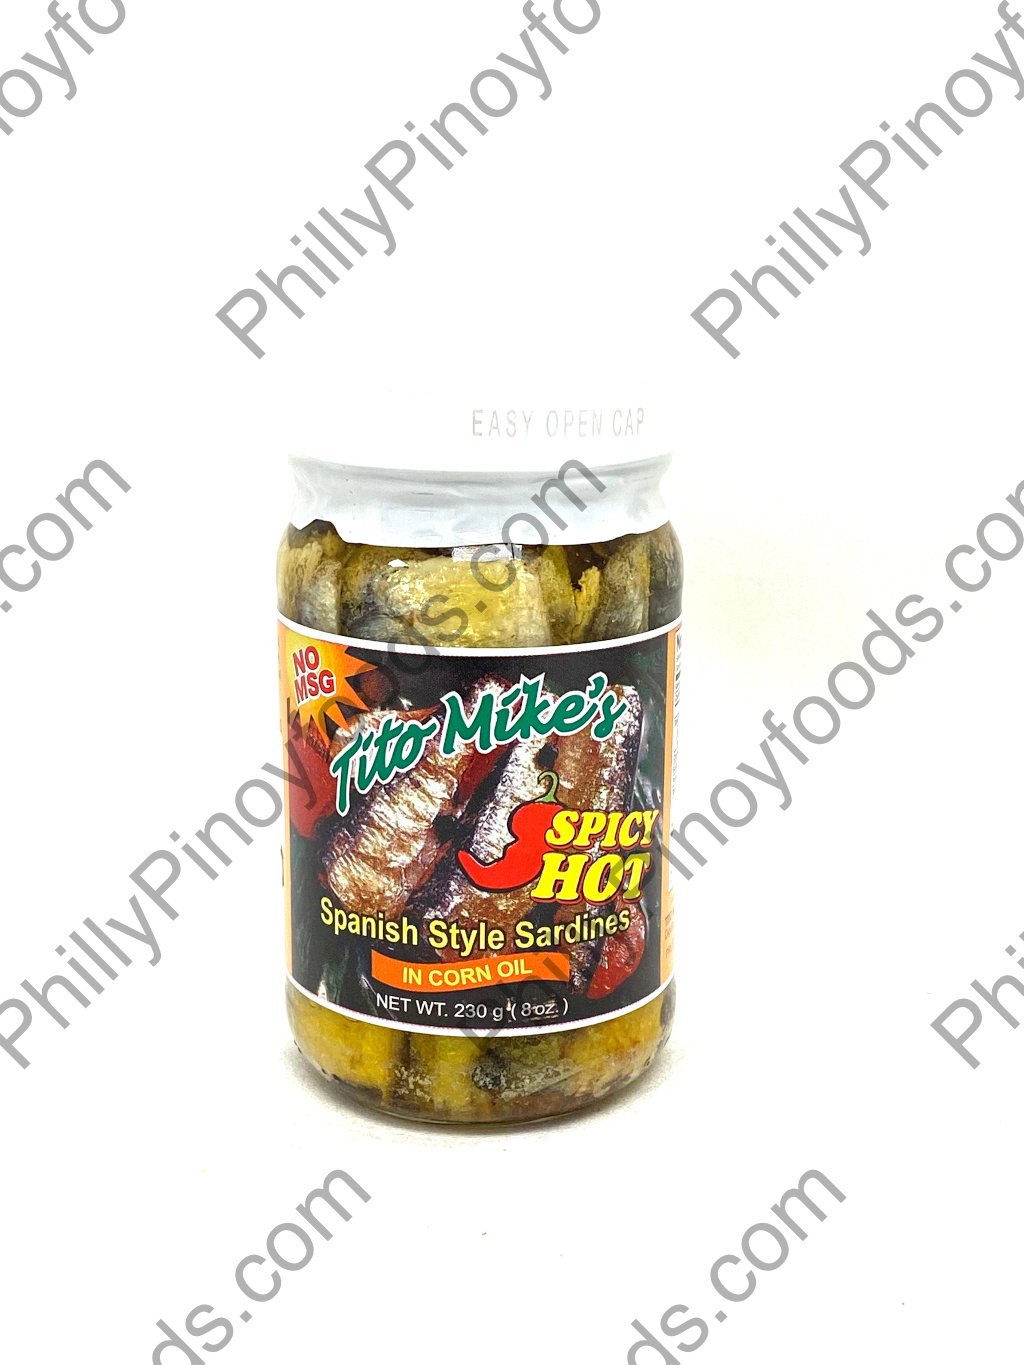 Tito Mike's Spanish Style Sardines Spicy 'n Hot 8oz (230g)